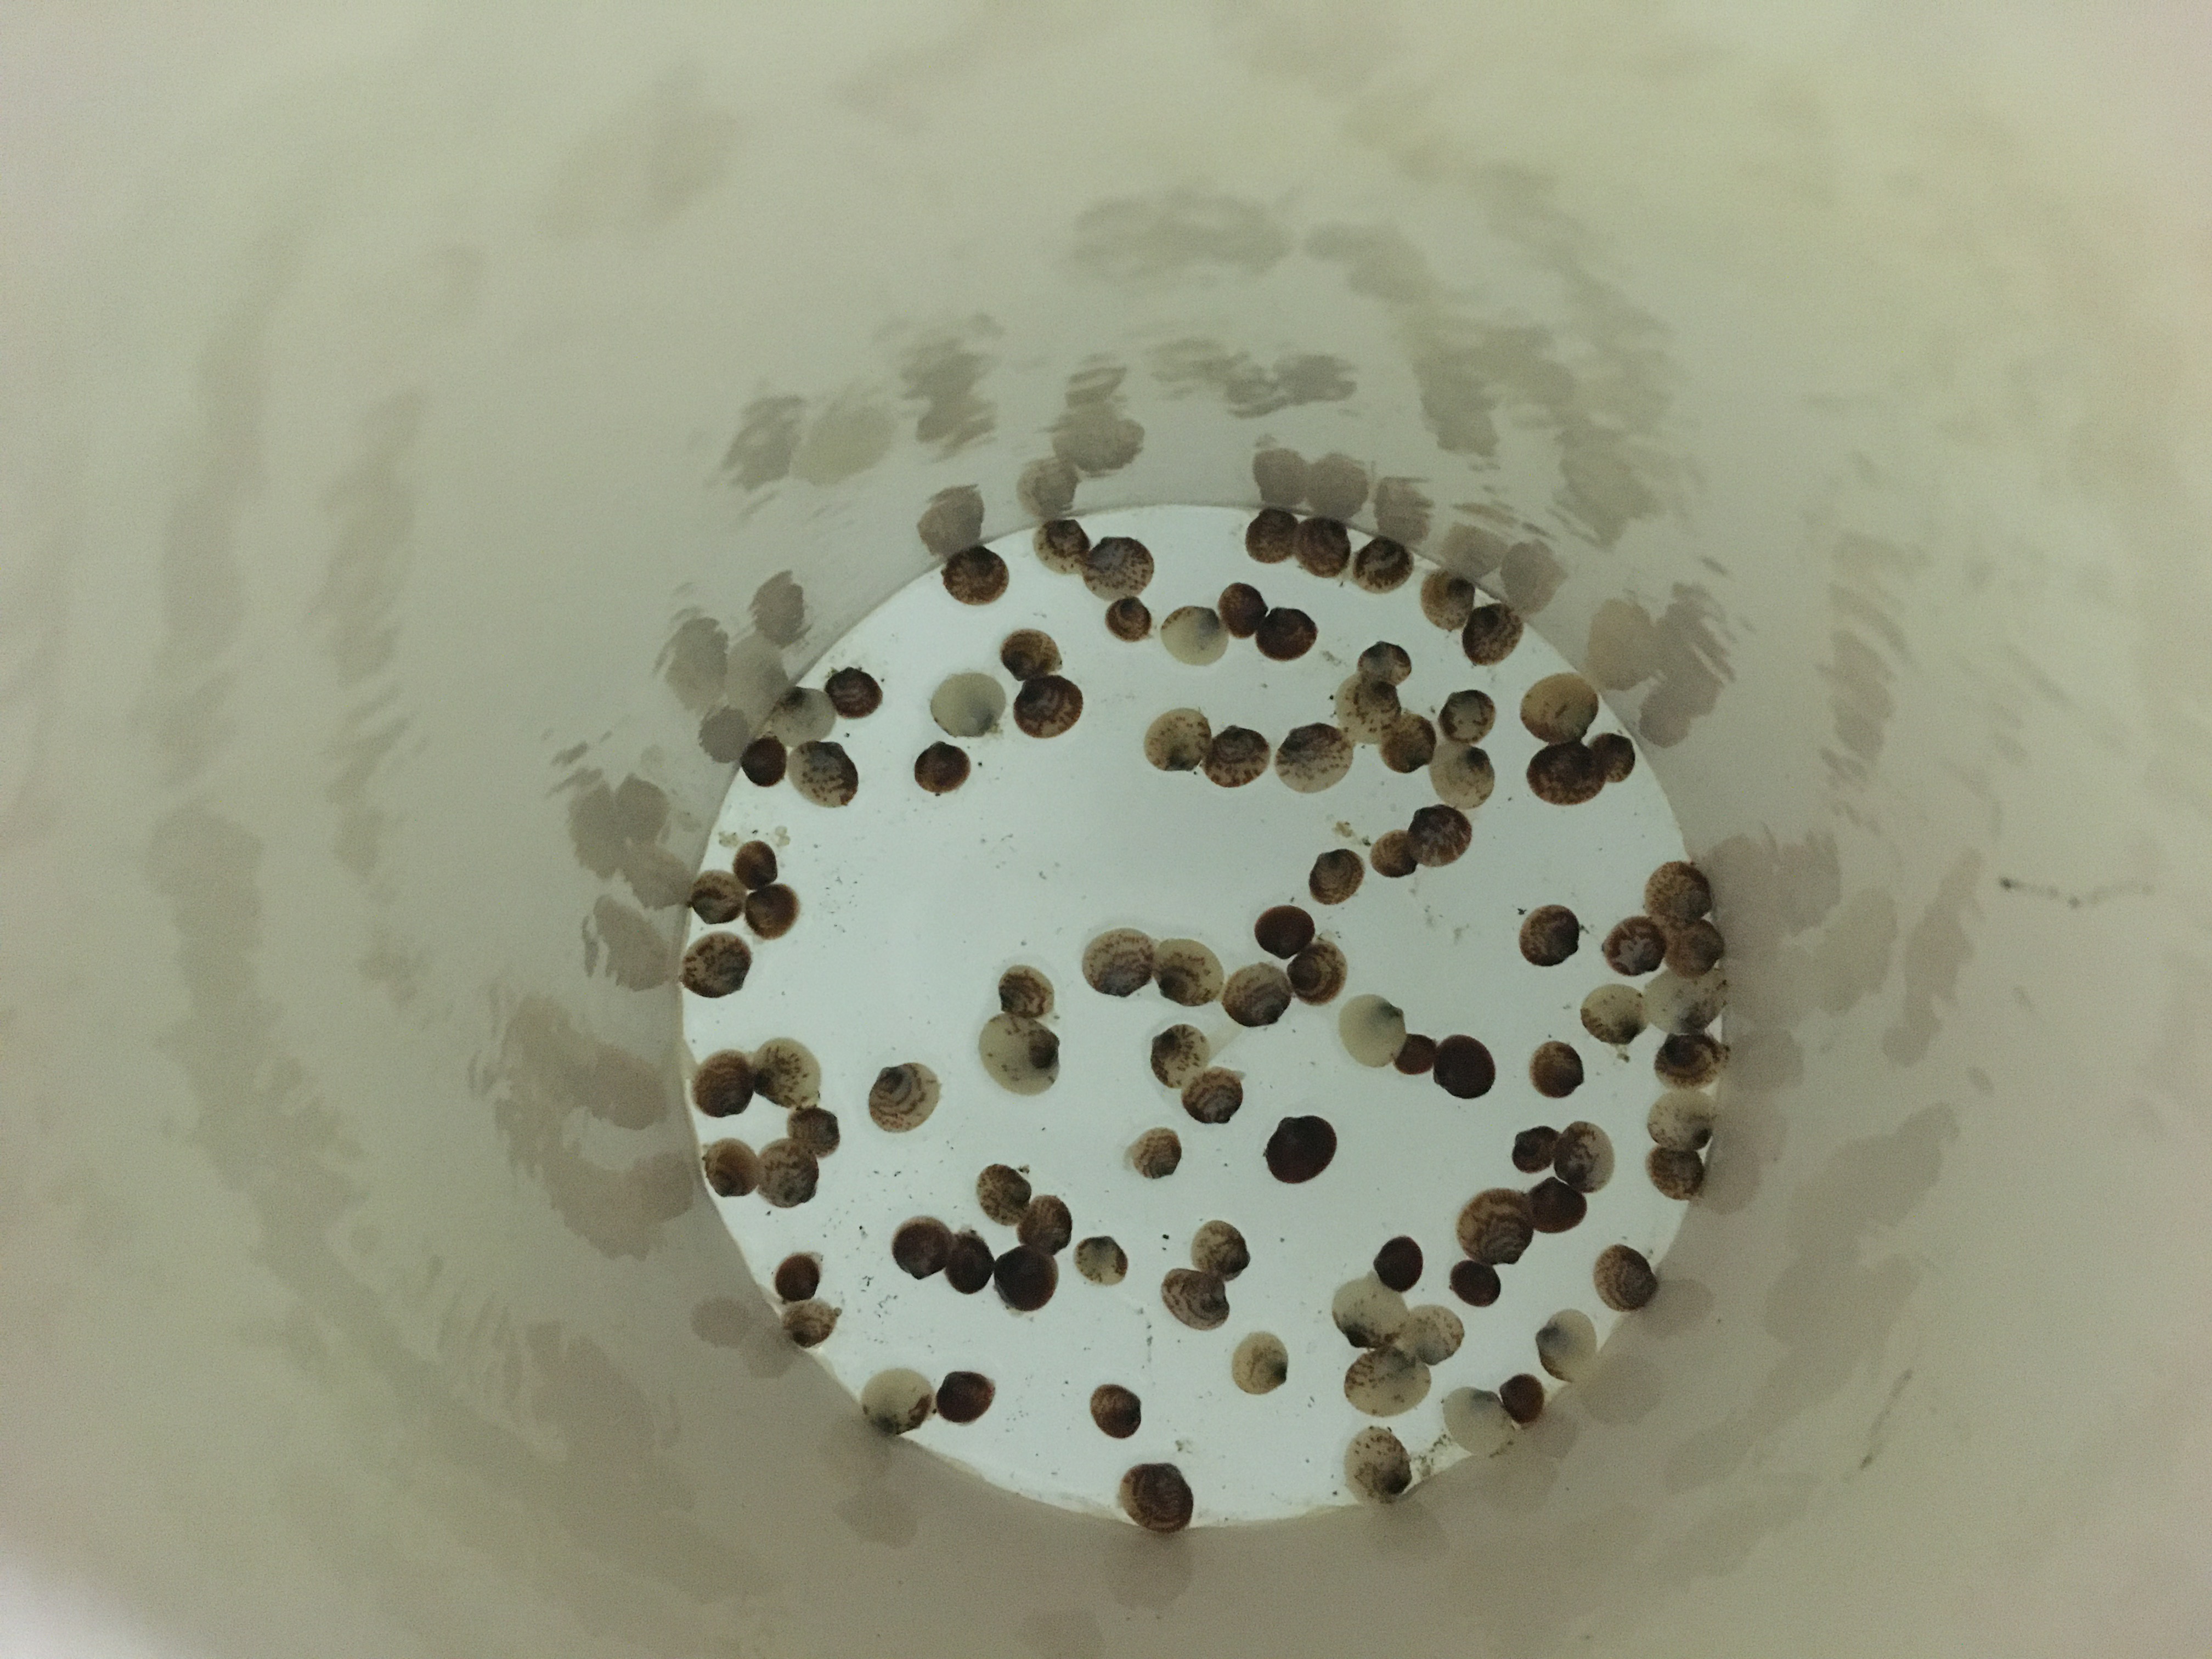 Juvenile cockles inside a PVC pipe with a mesh screen attached, suspended in a bucket with seawater.